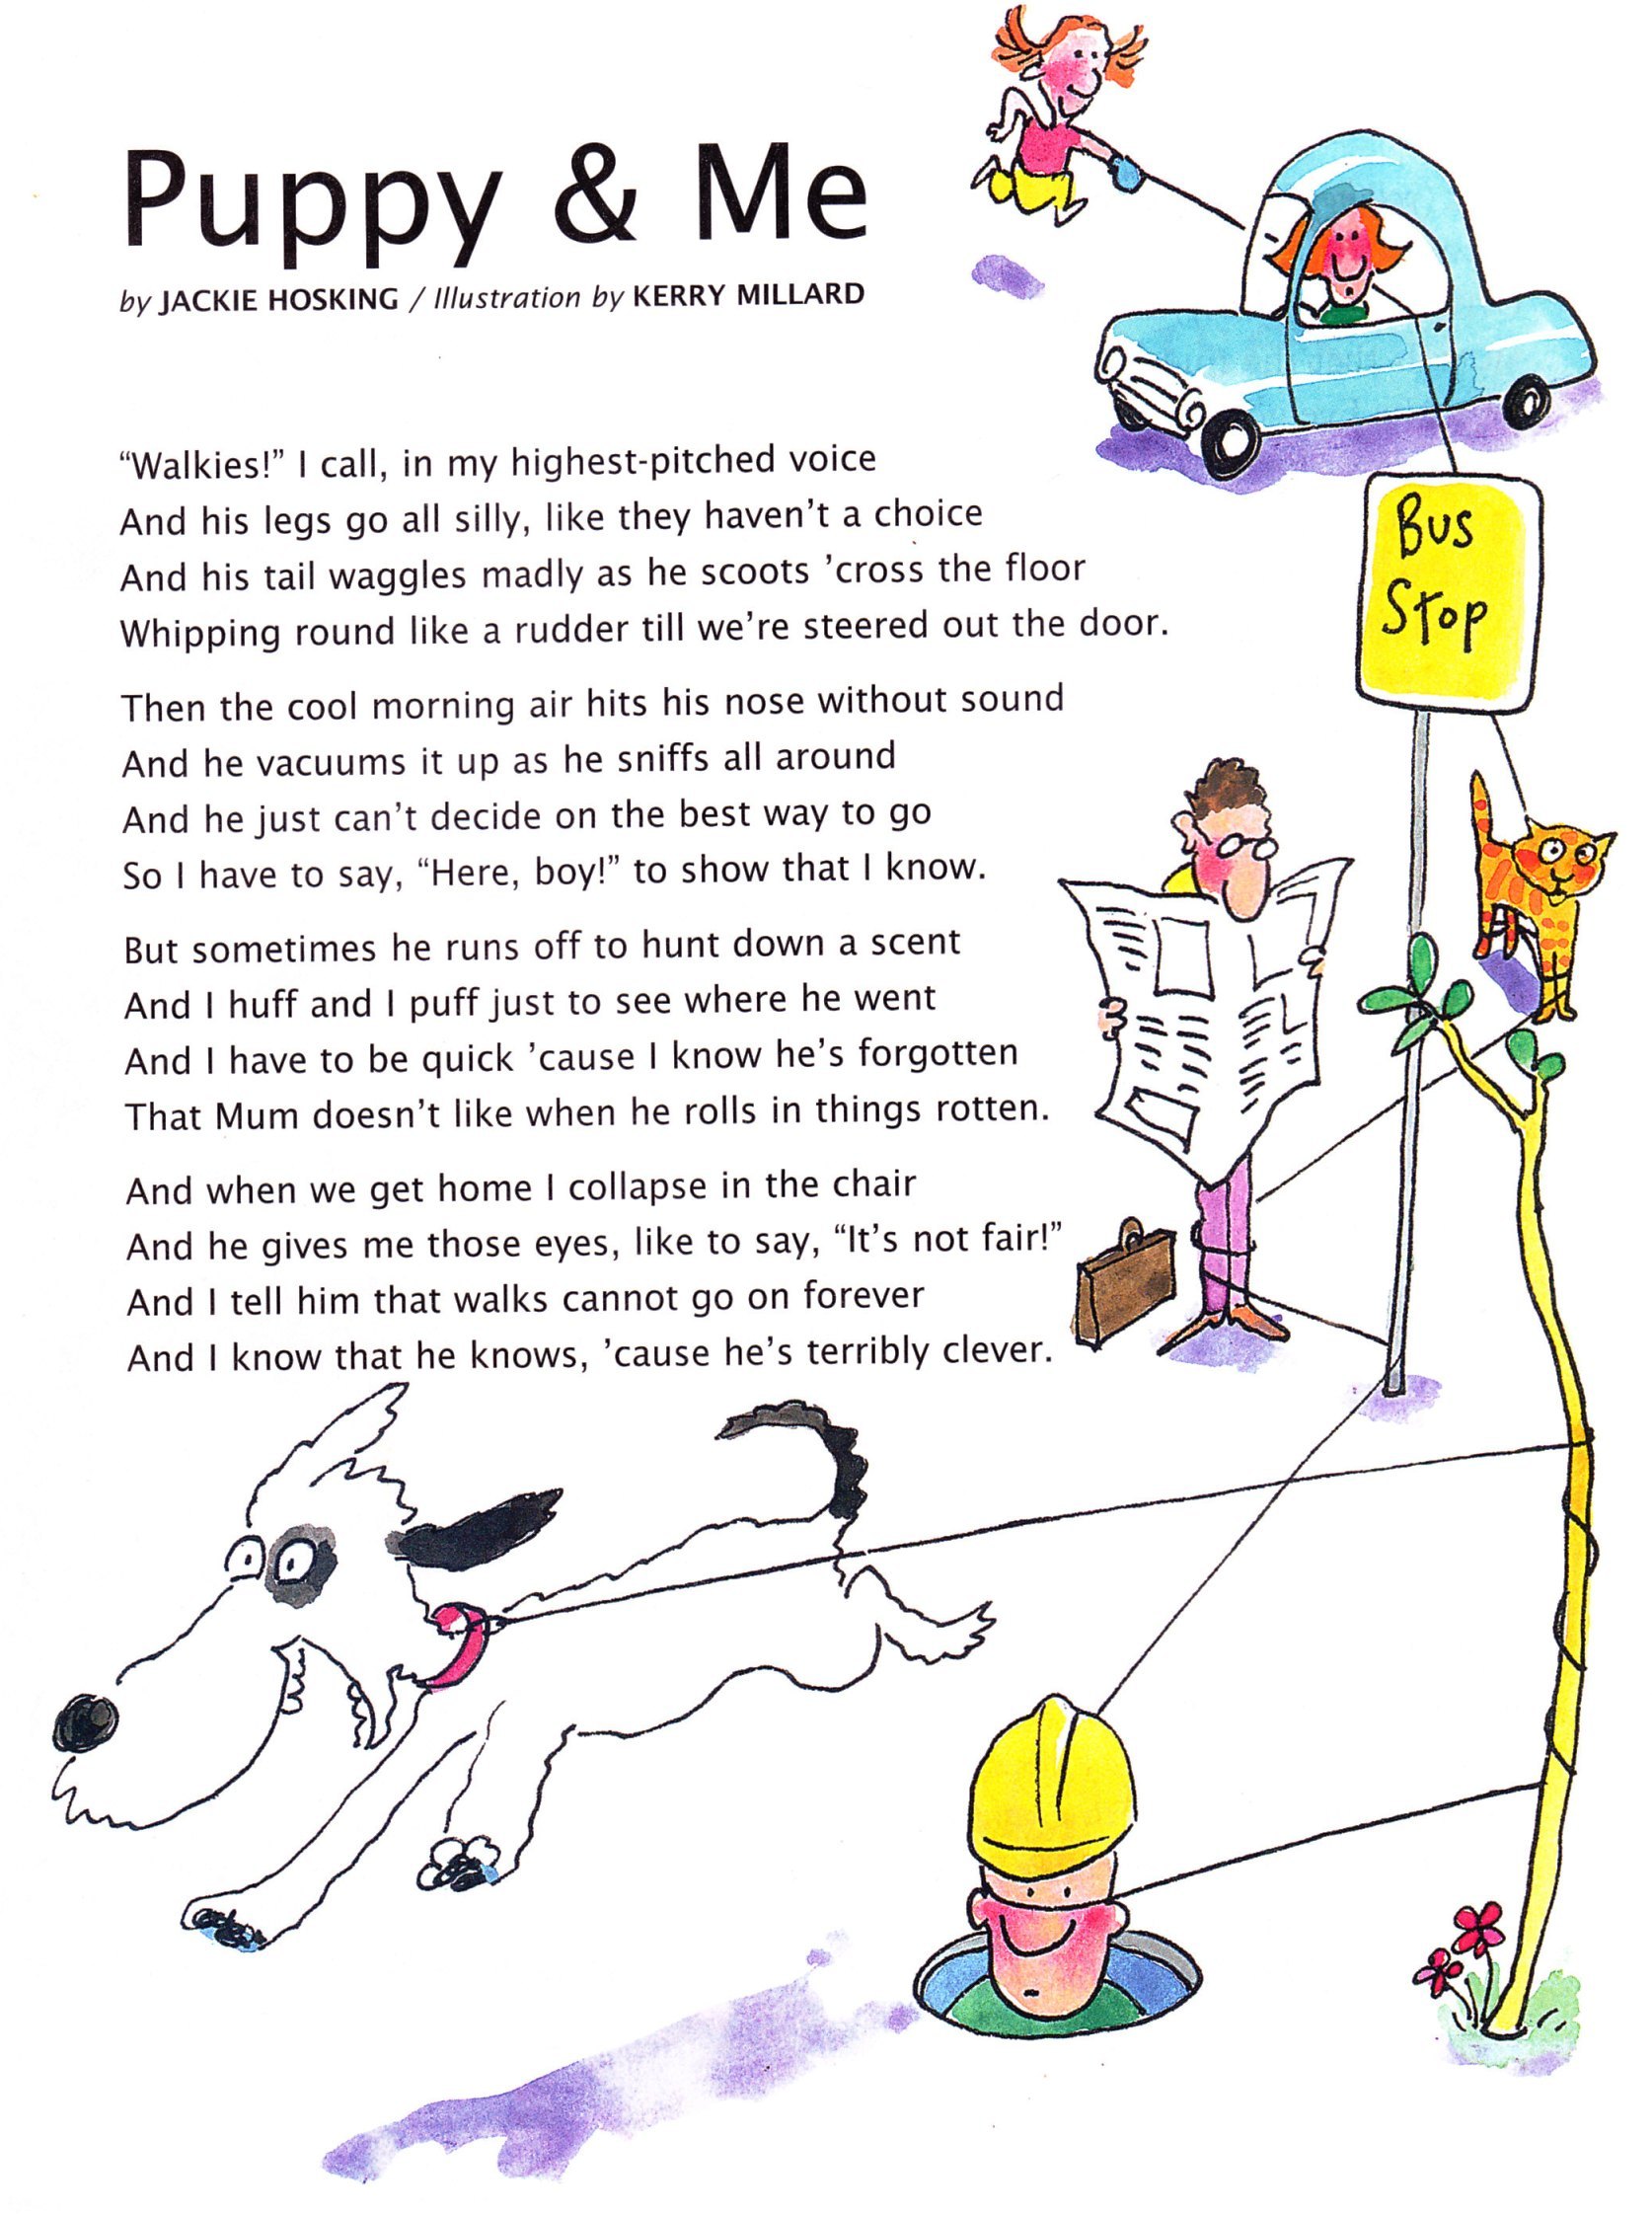 Fun Poem For Kids Be Glad Your Nose Is On Your Face By Jack